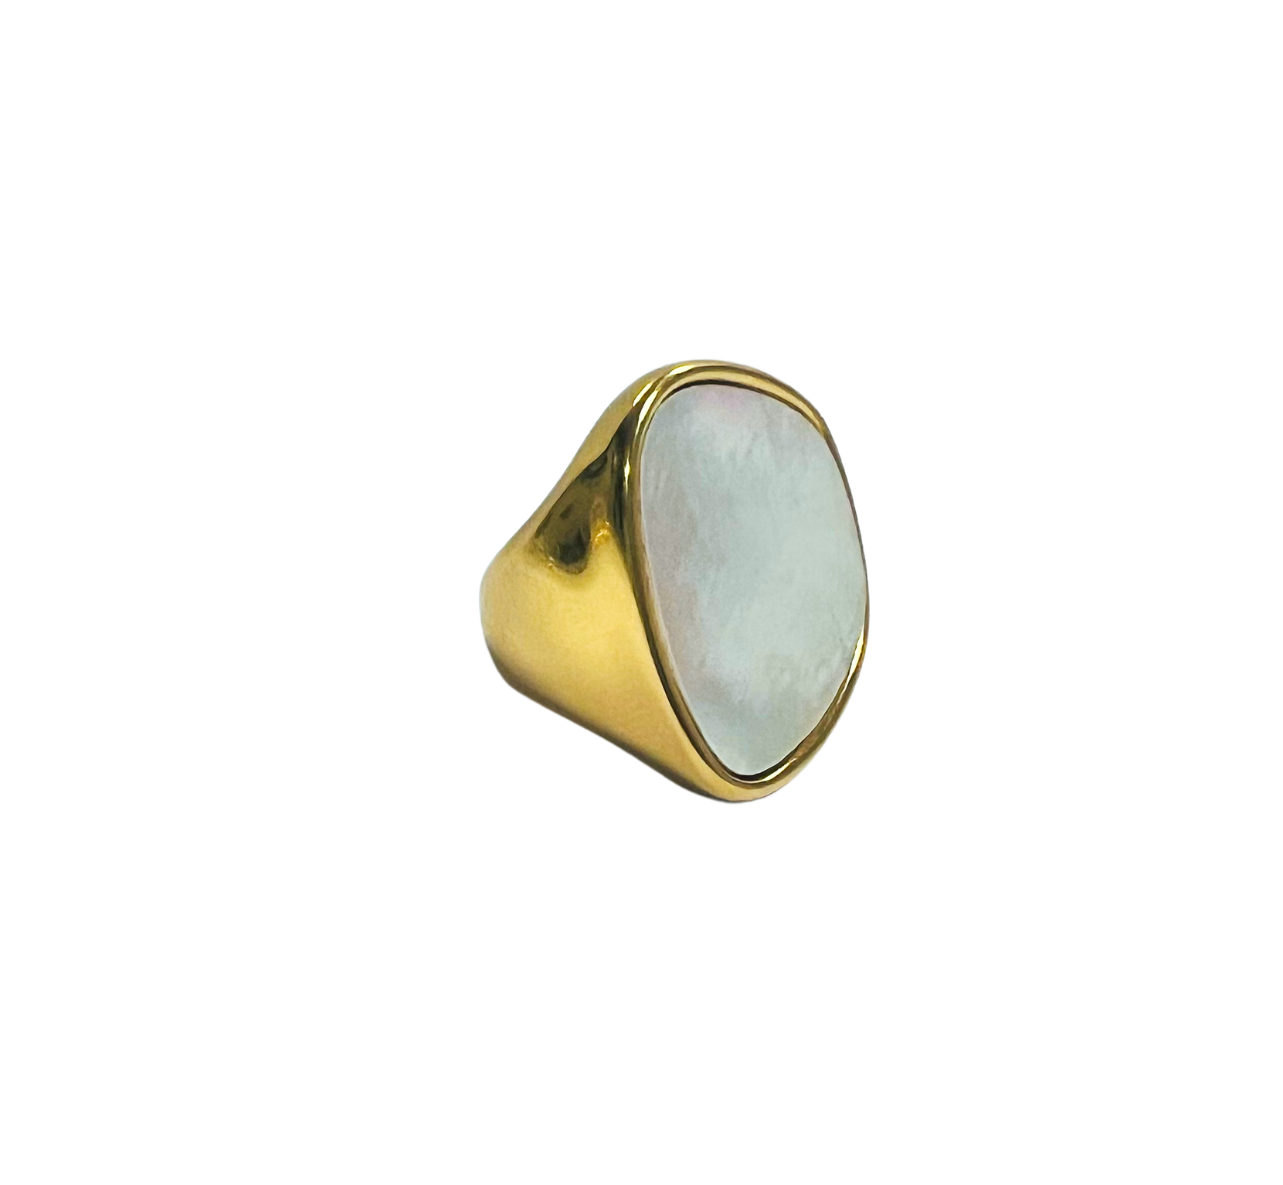 The White Stone Gold Ring